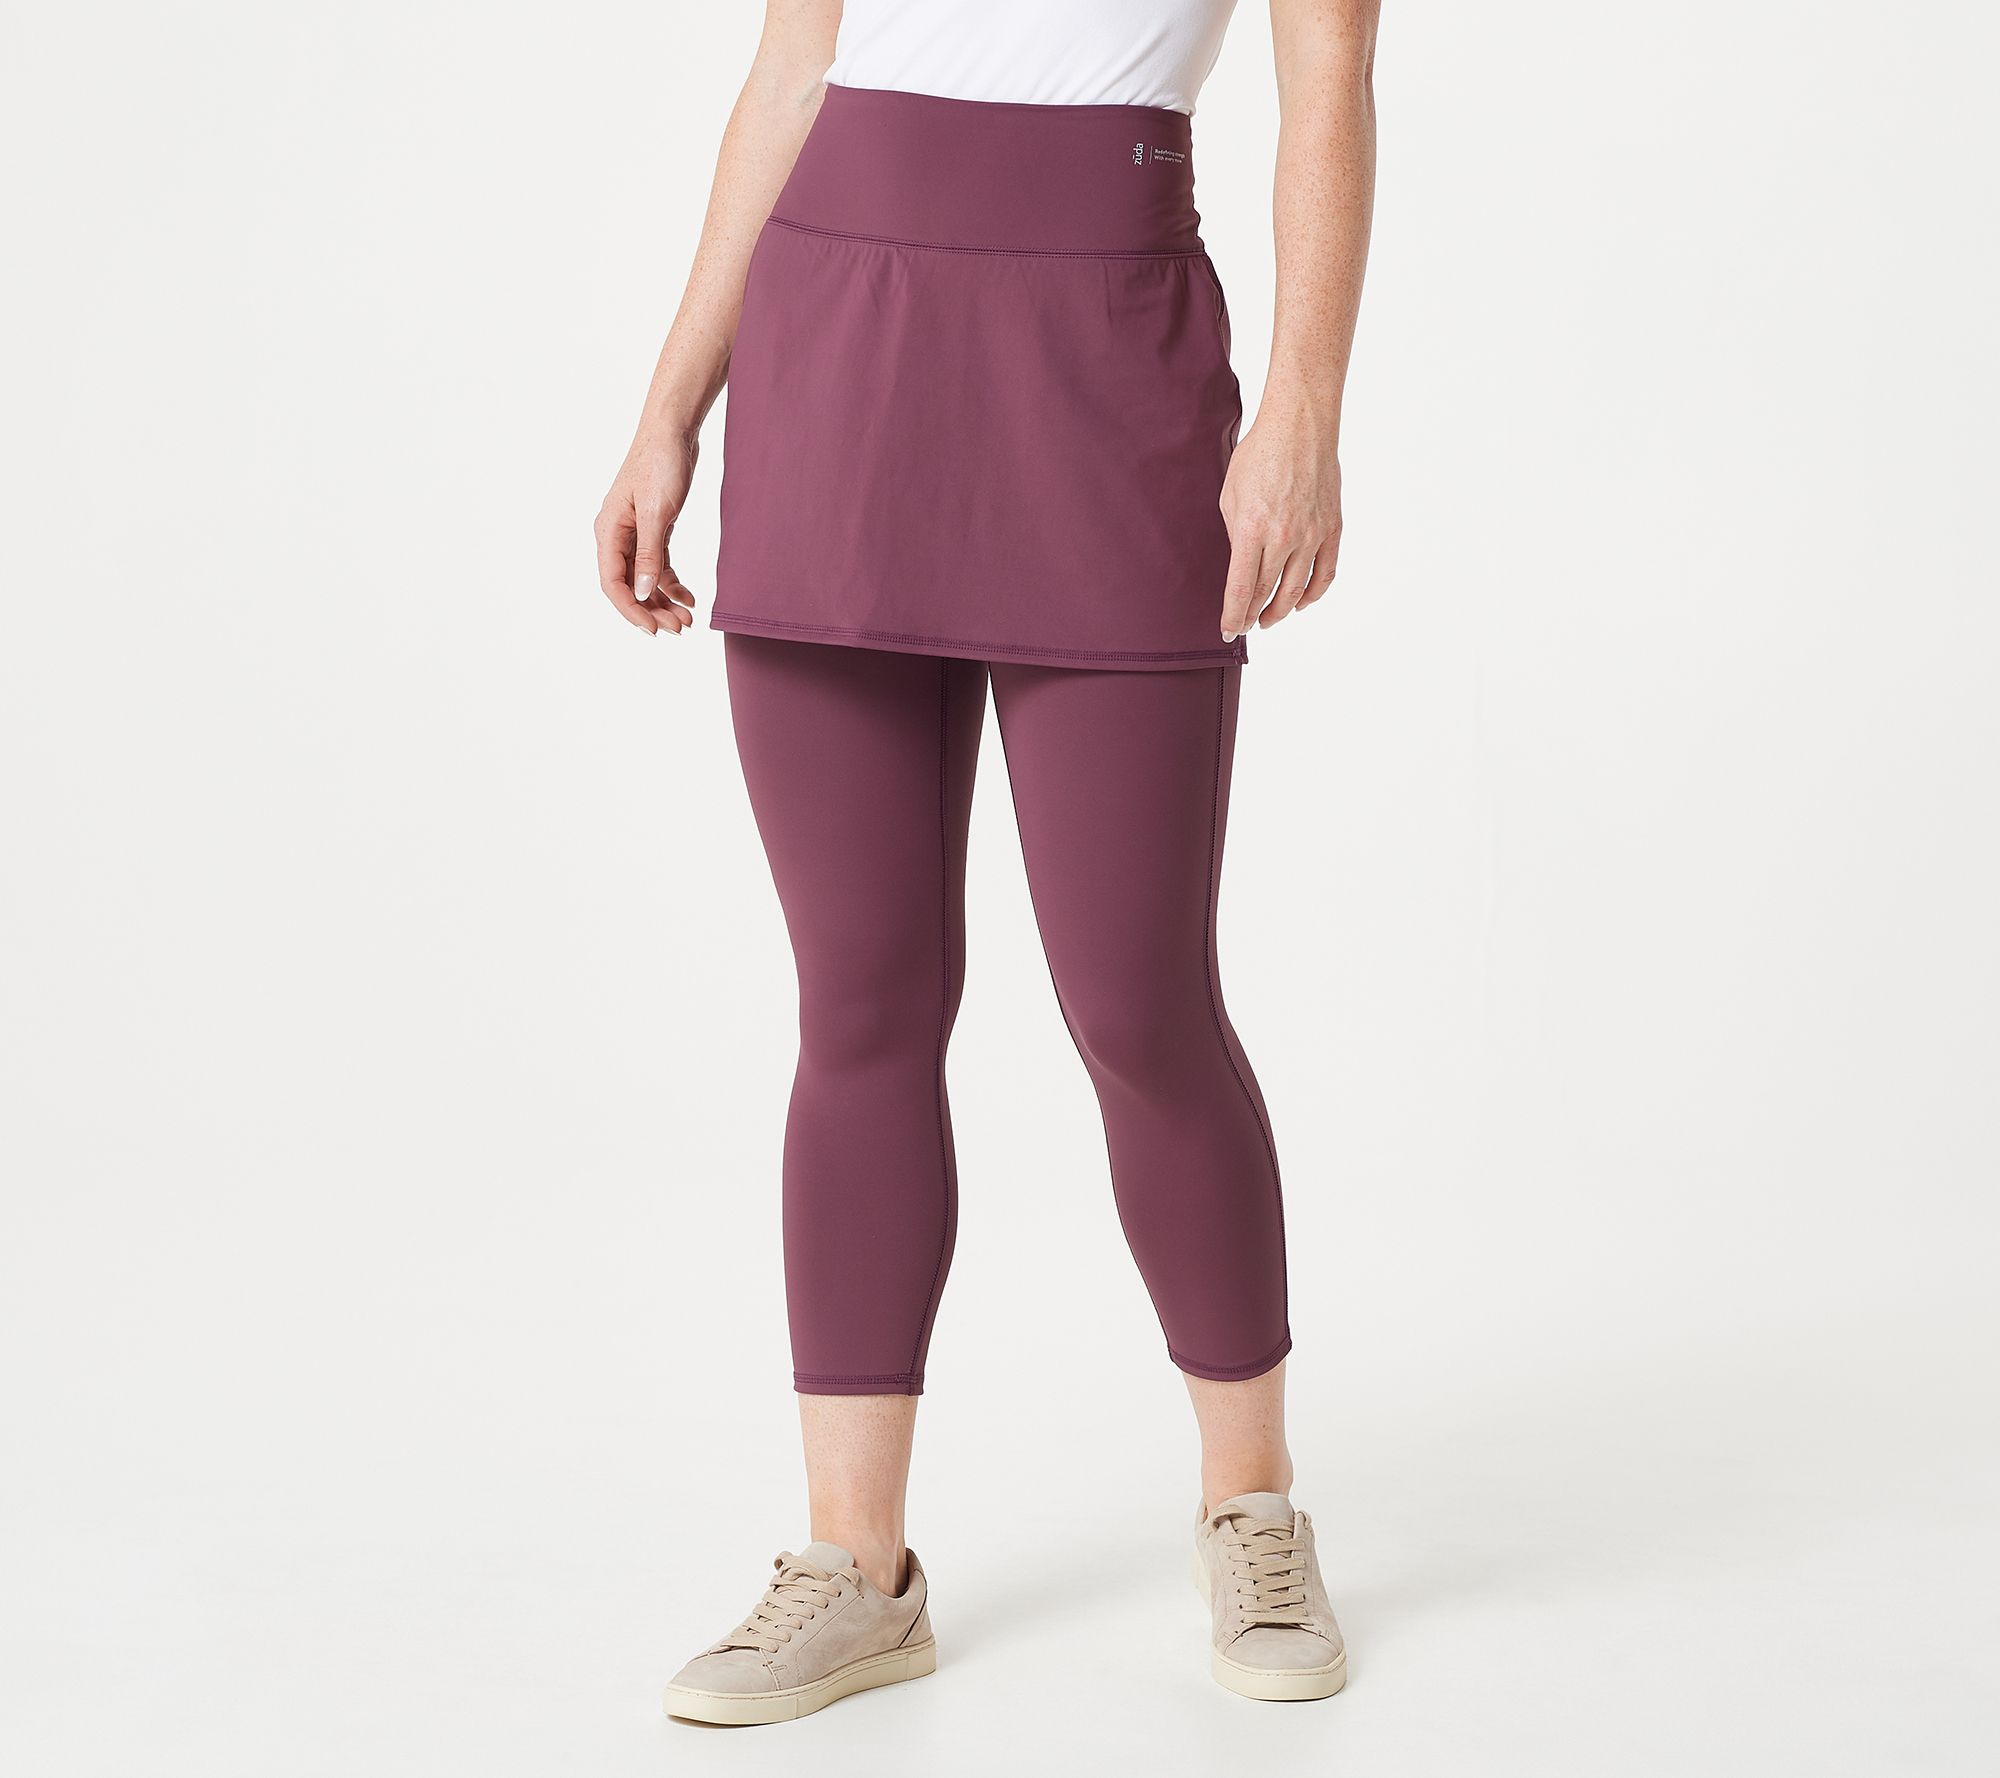 Legacy Leggings With Skirt Attached